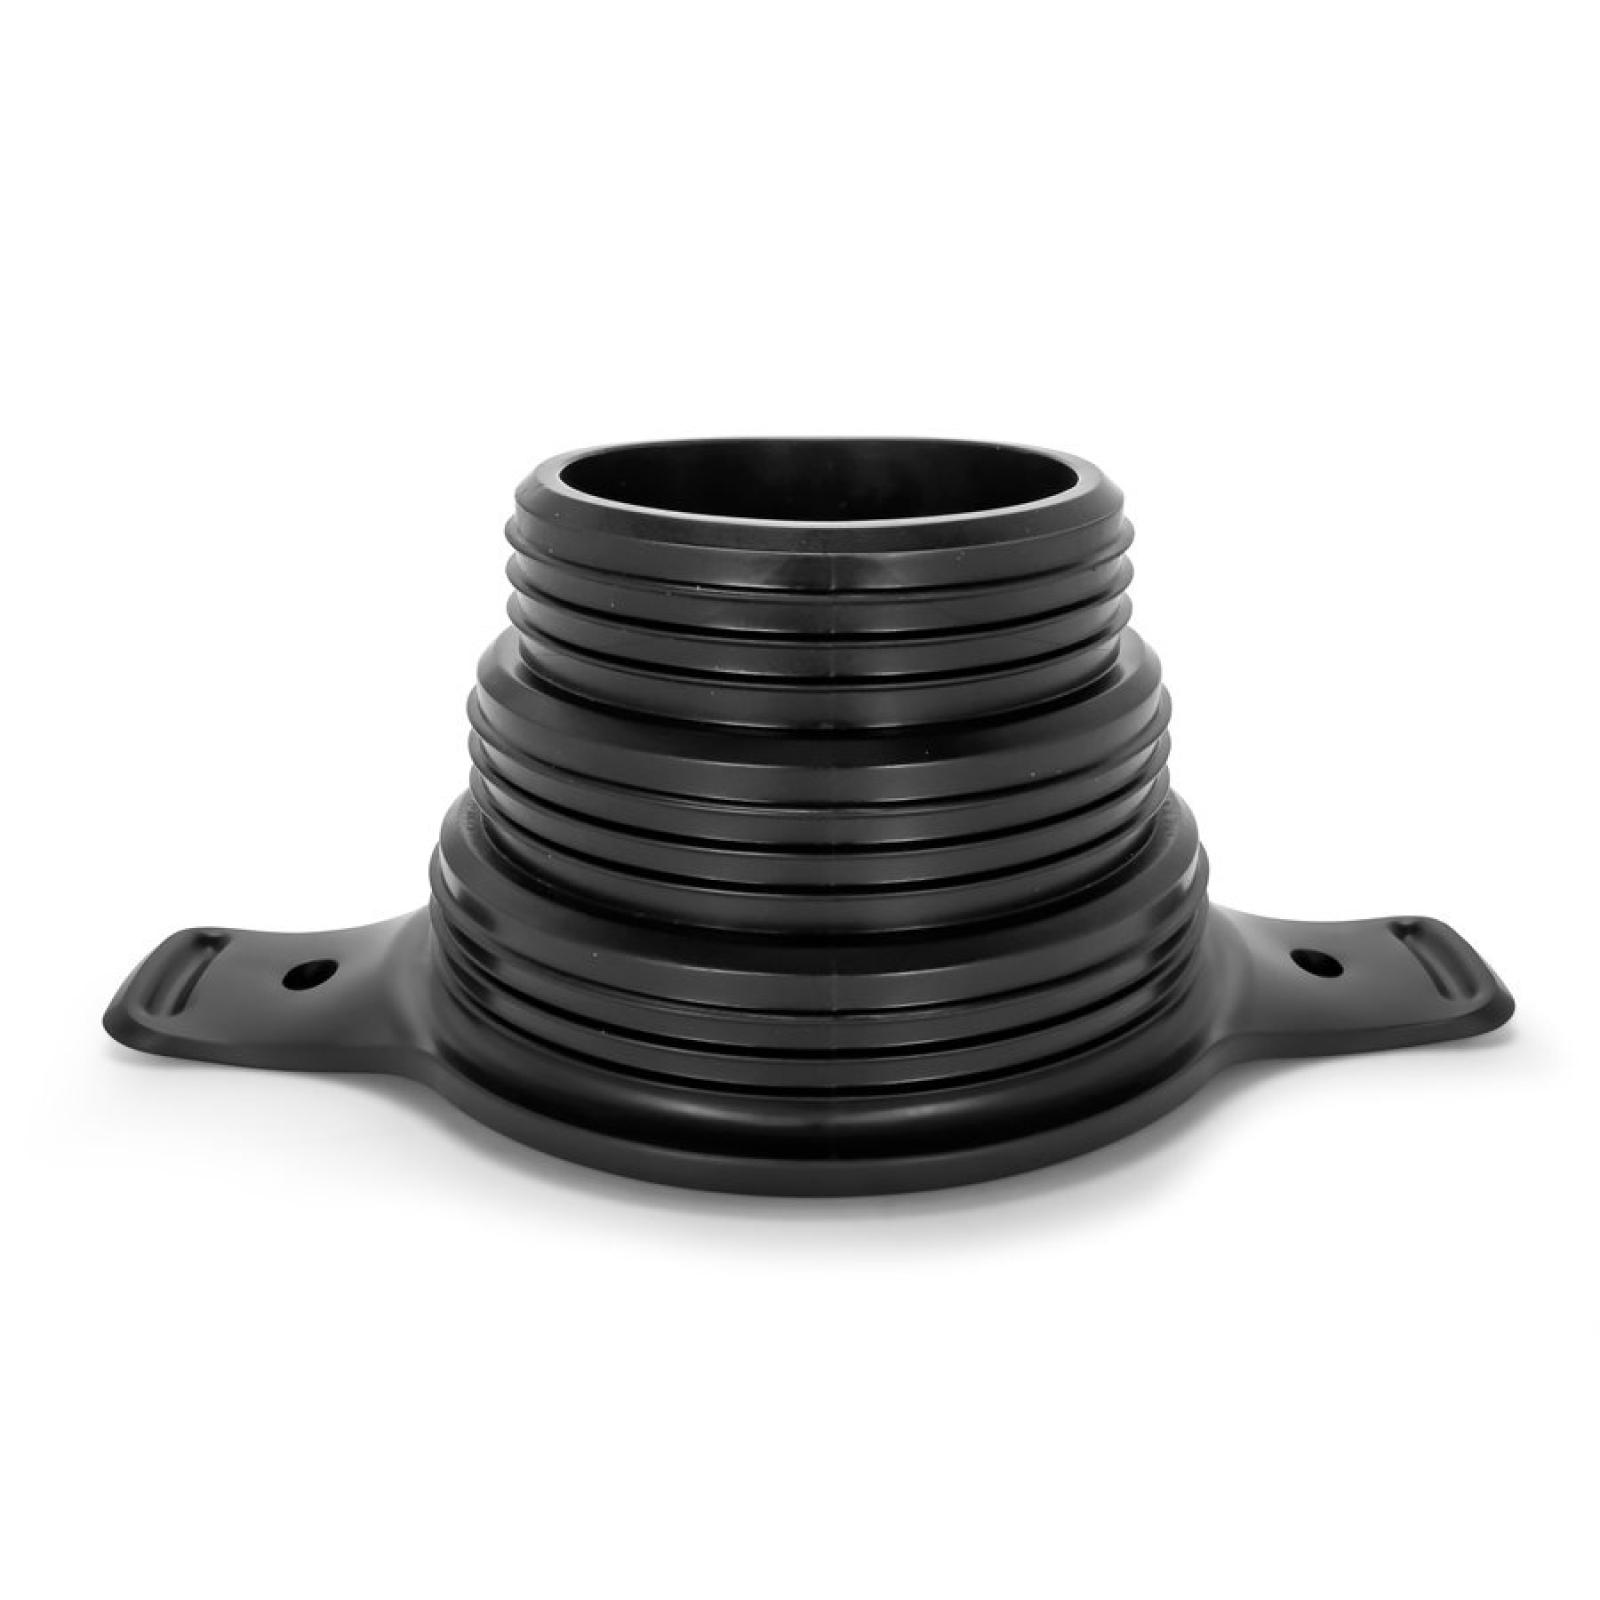 3-in-1 Flexible Sewer Hose Seal